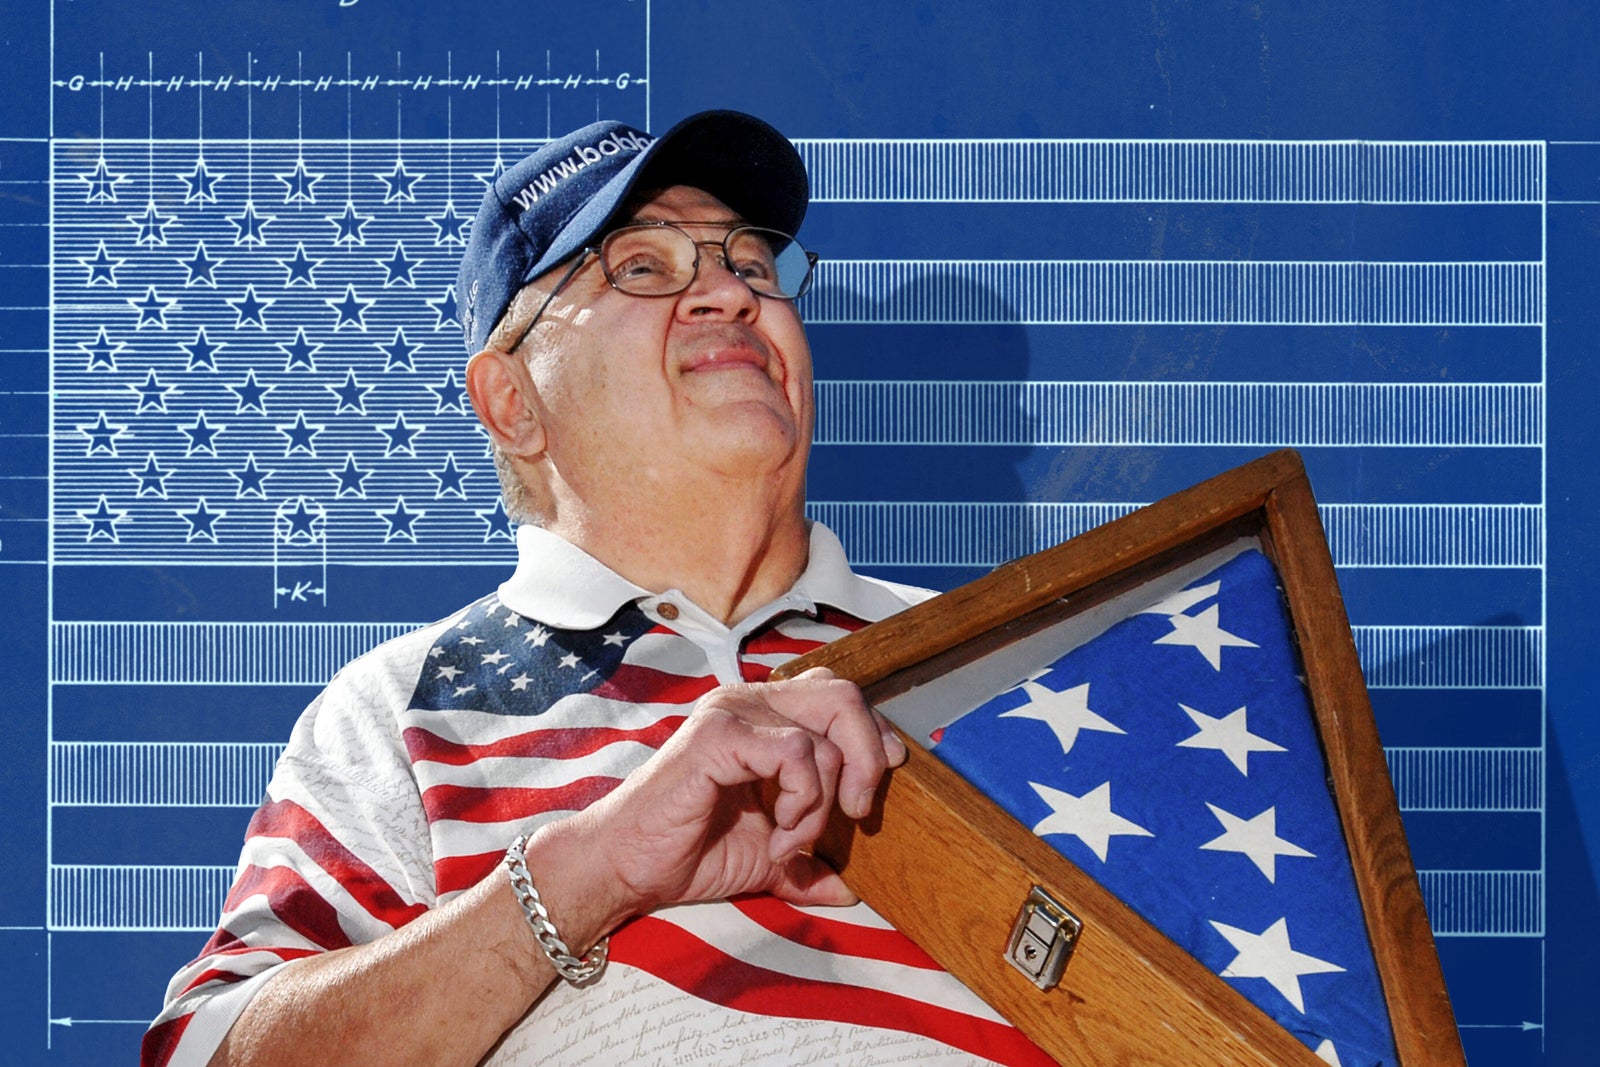 Stars and Stripes: The Story of the American Flag